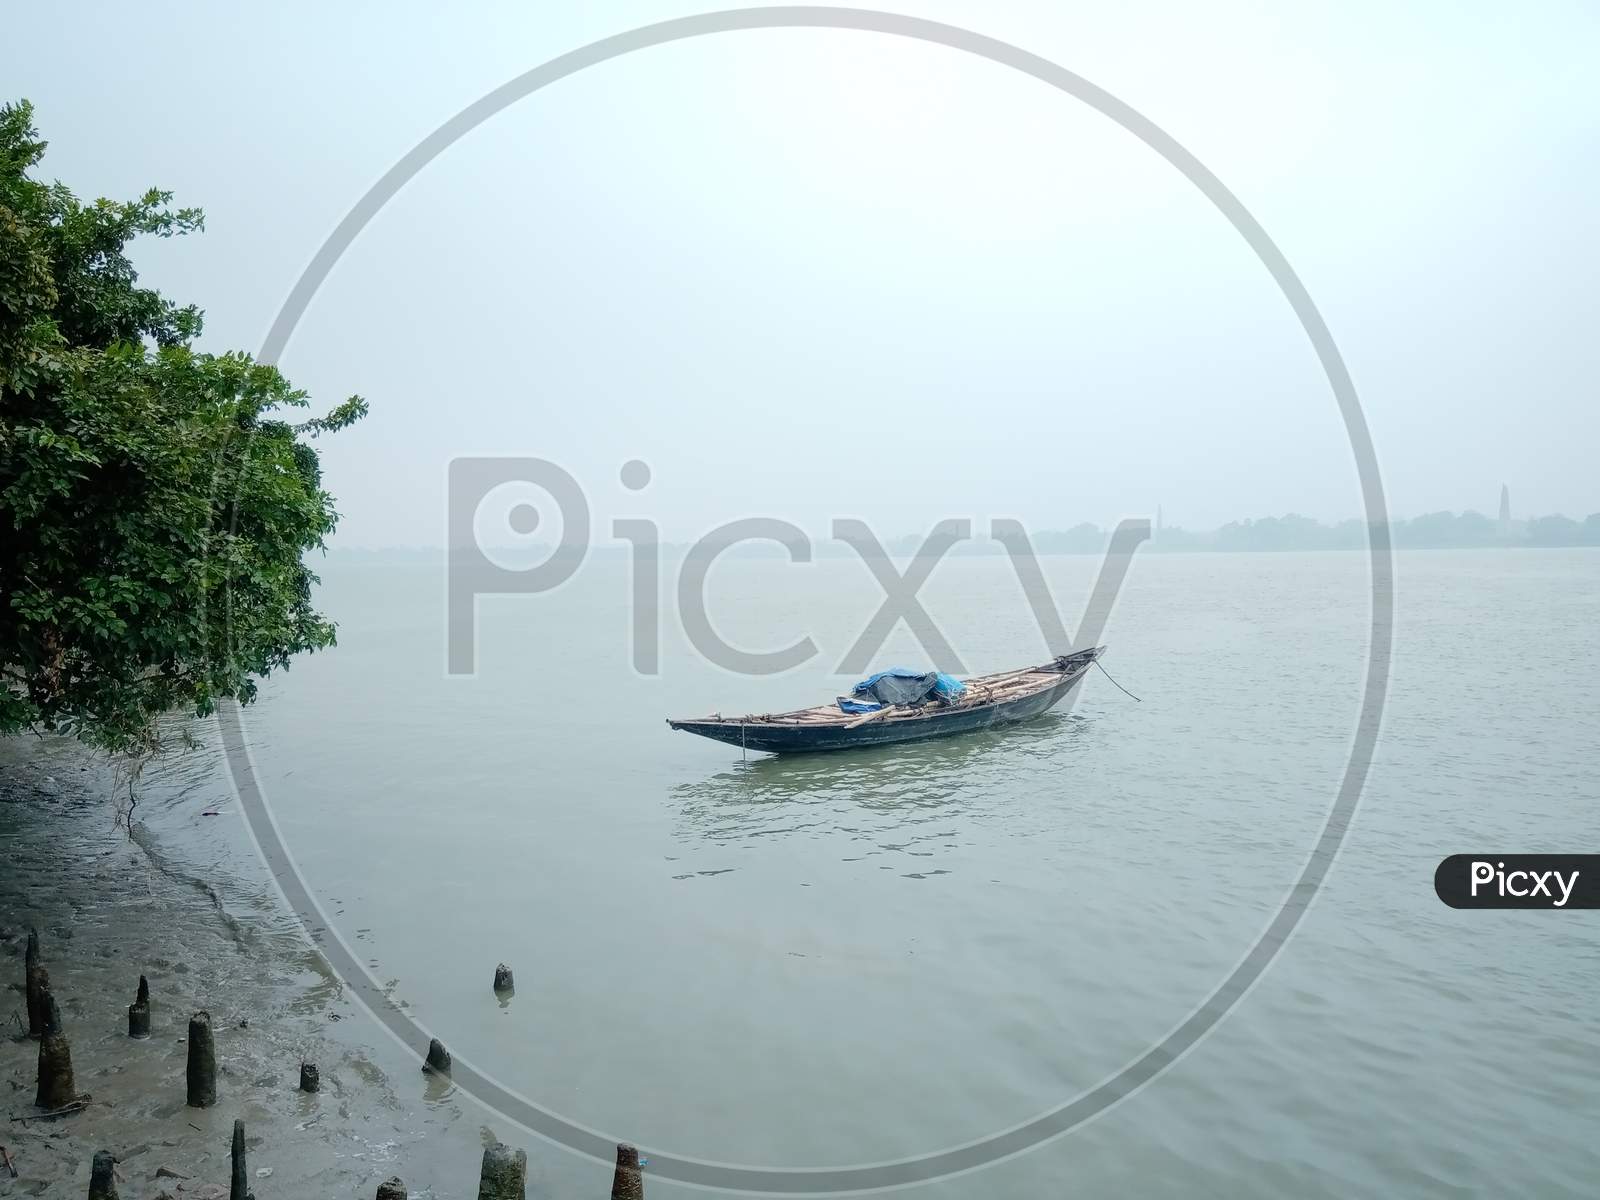 Boating on the river in a foggy morning